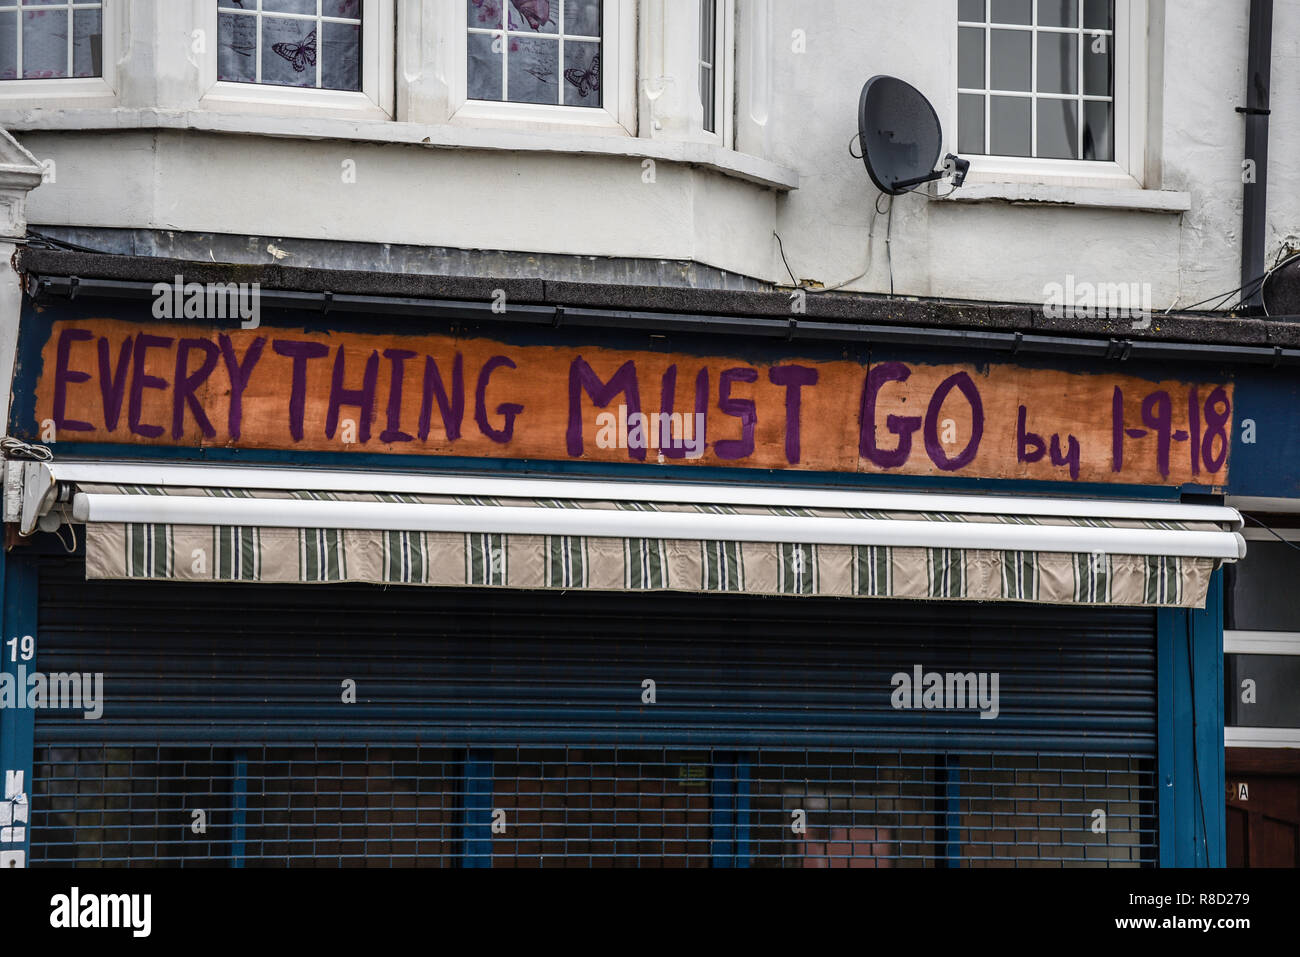 Everything must go by 1-9-18  rough painted sign. Closed. Shut down. Urban decay Stock Photo